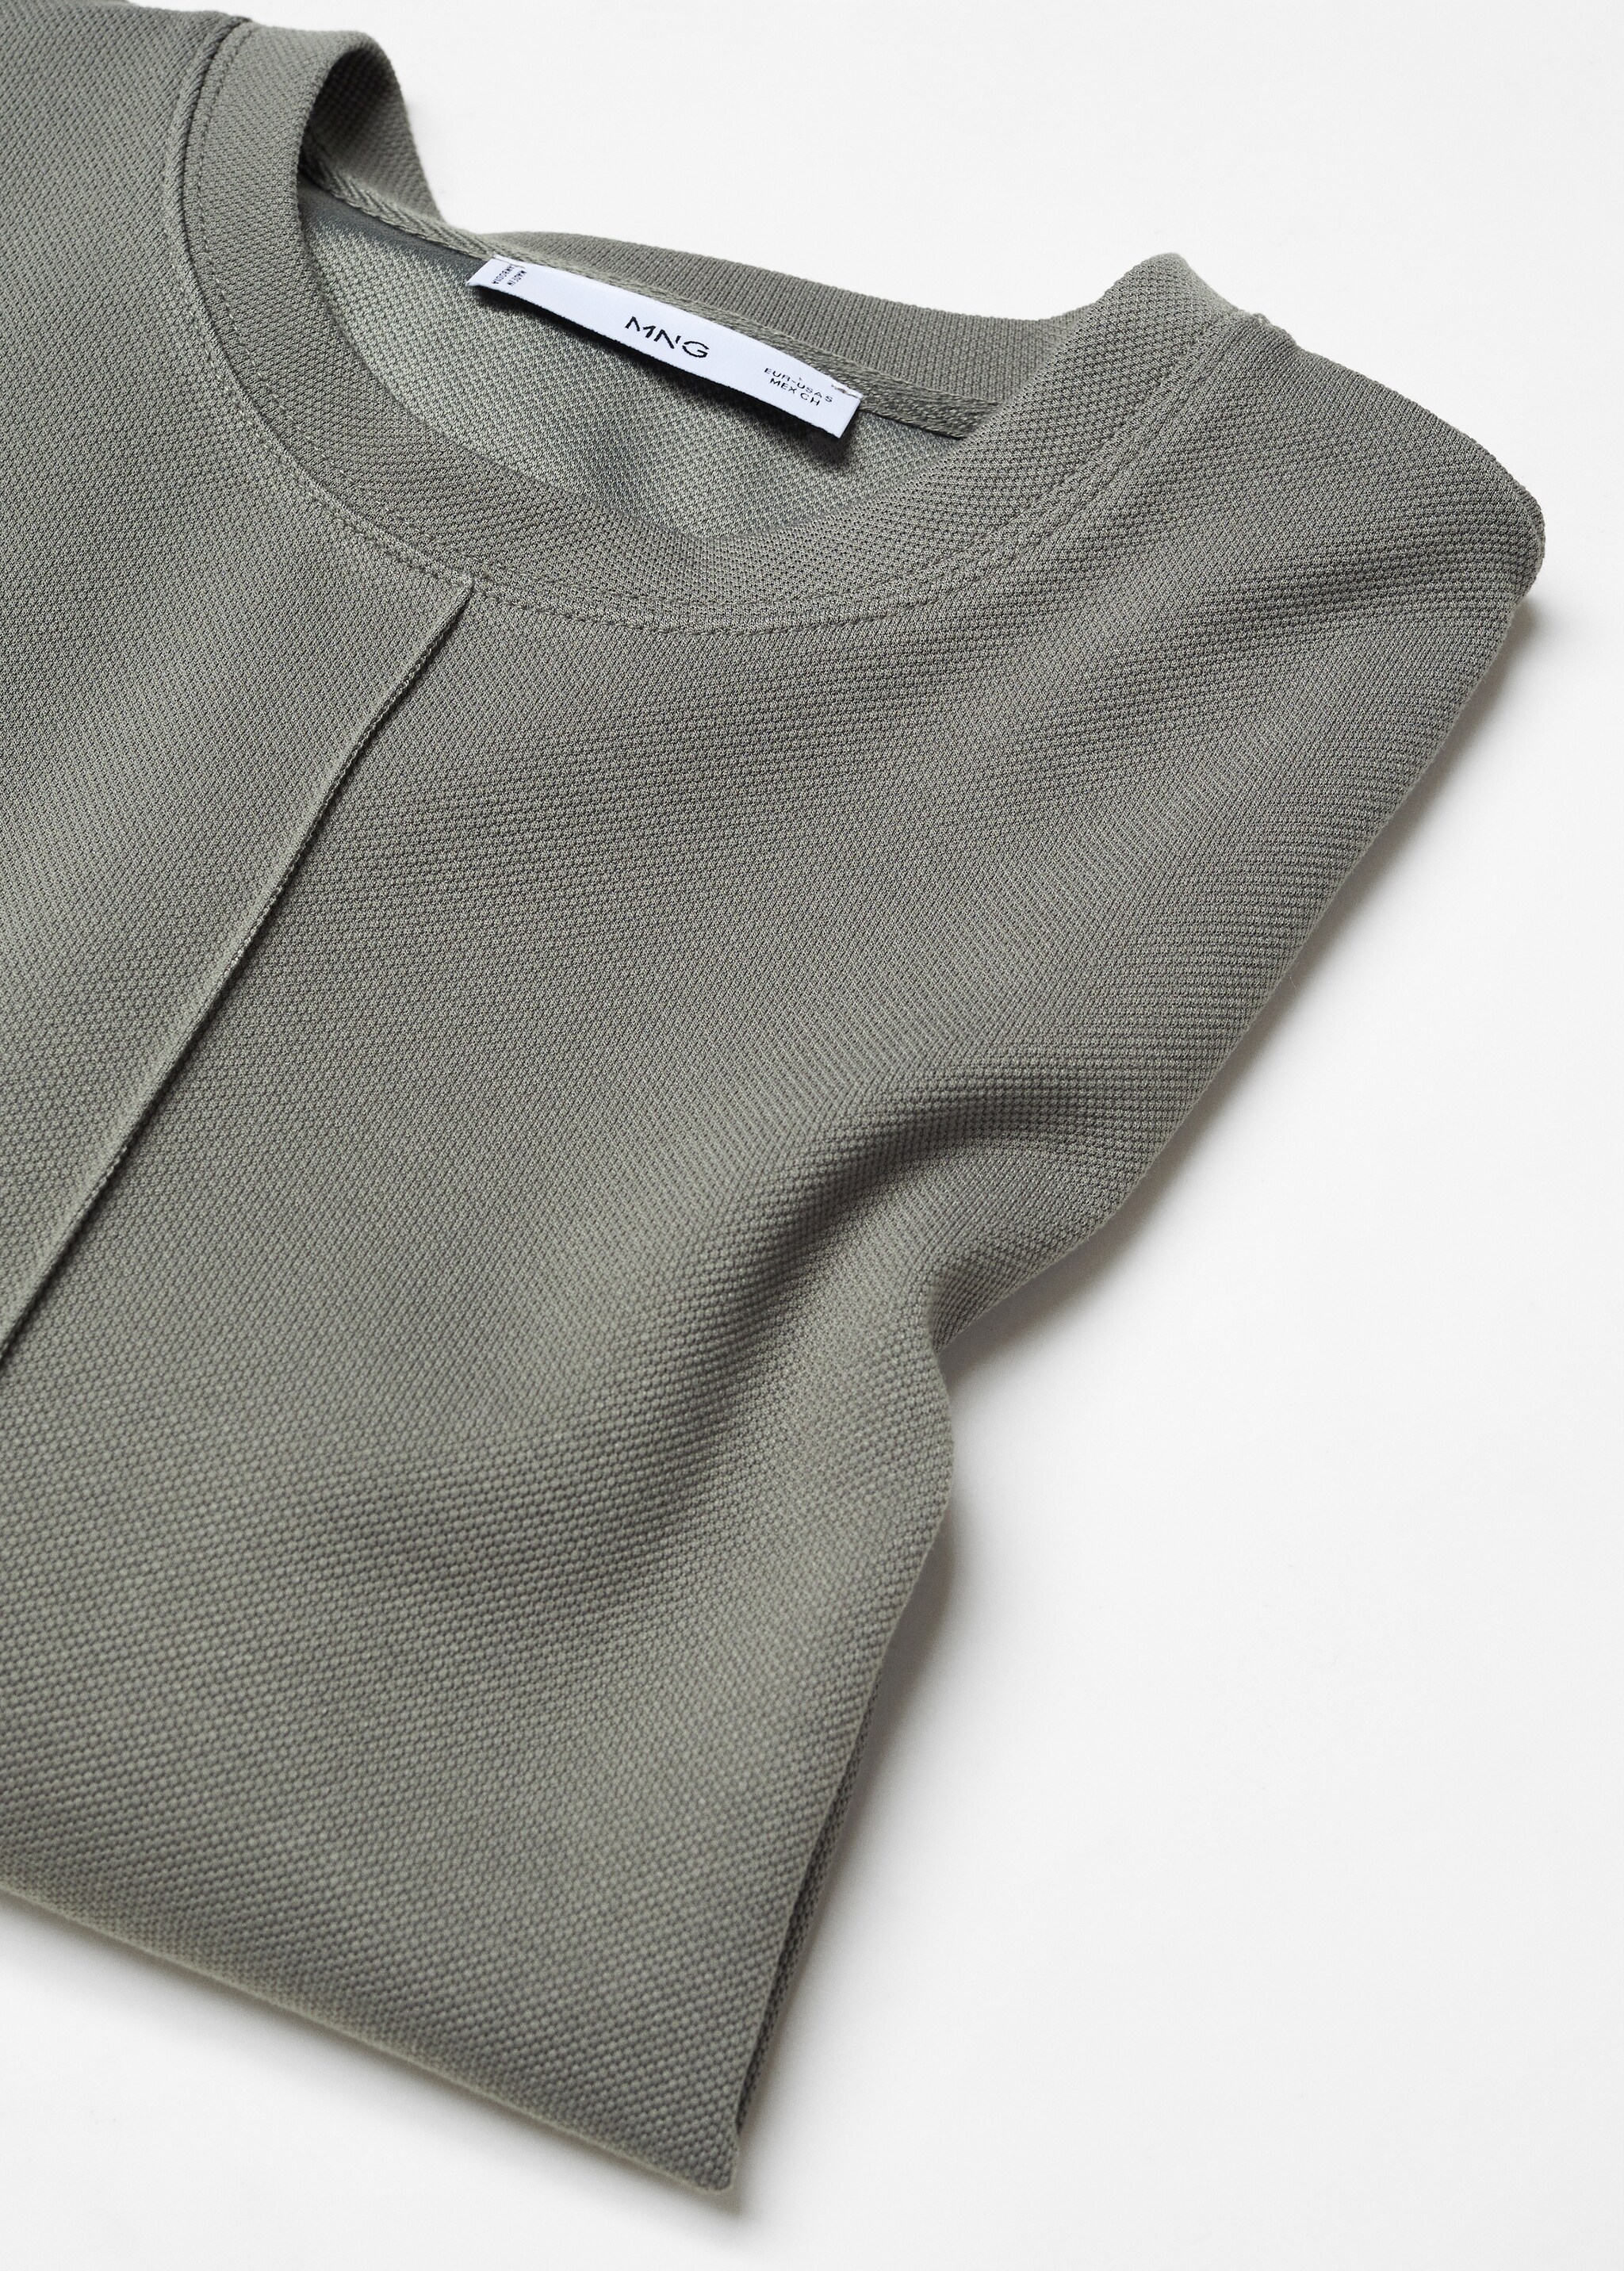 Decorative stitching sweatshirt - Details of the article 8